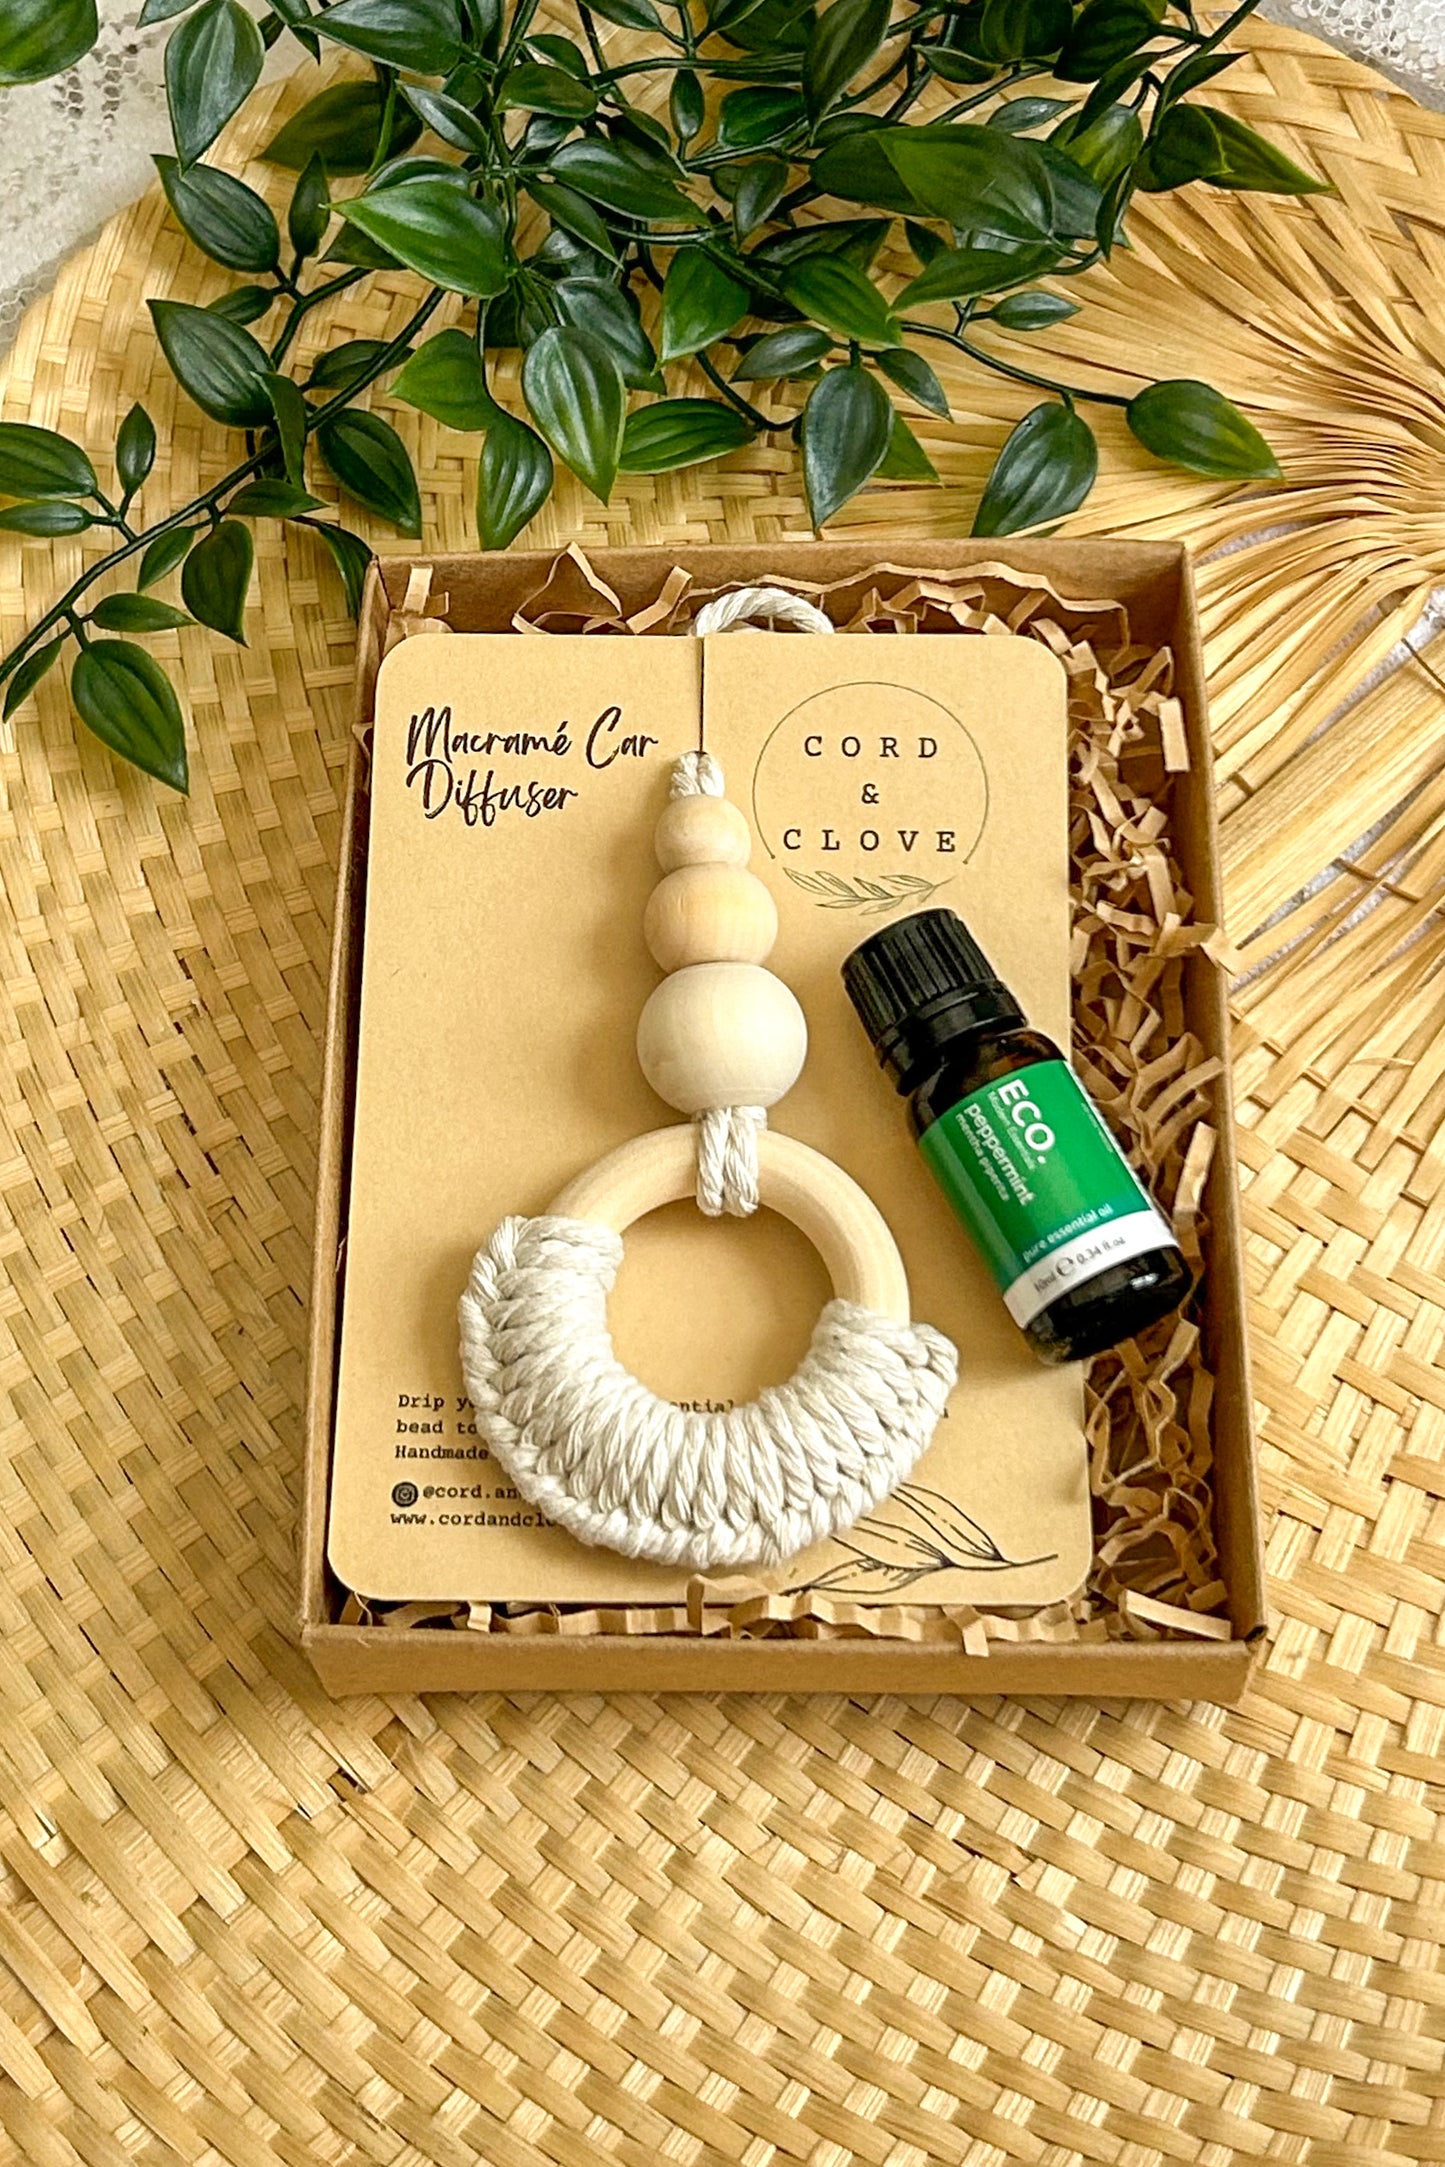 NEW! Essential Oil Diffuser Gift Set - Peppermint